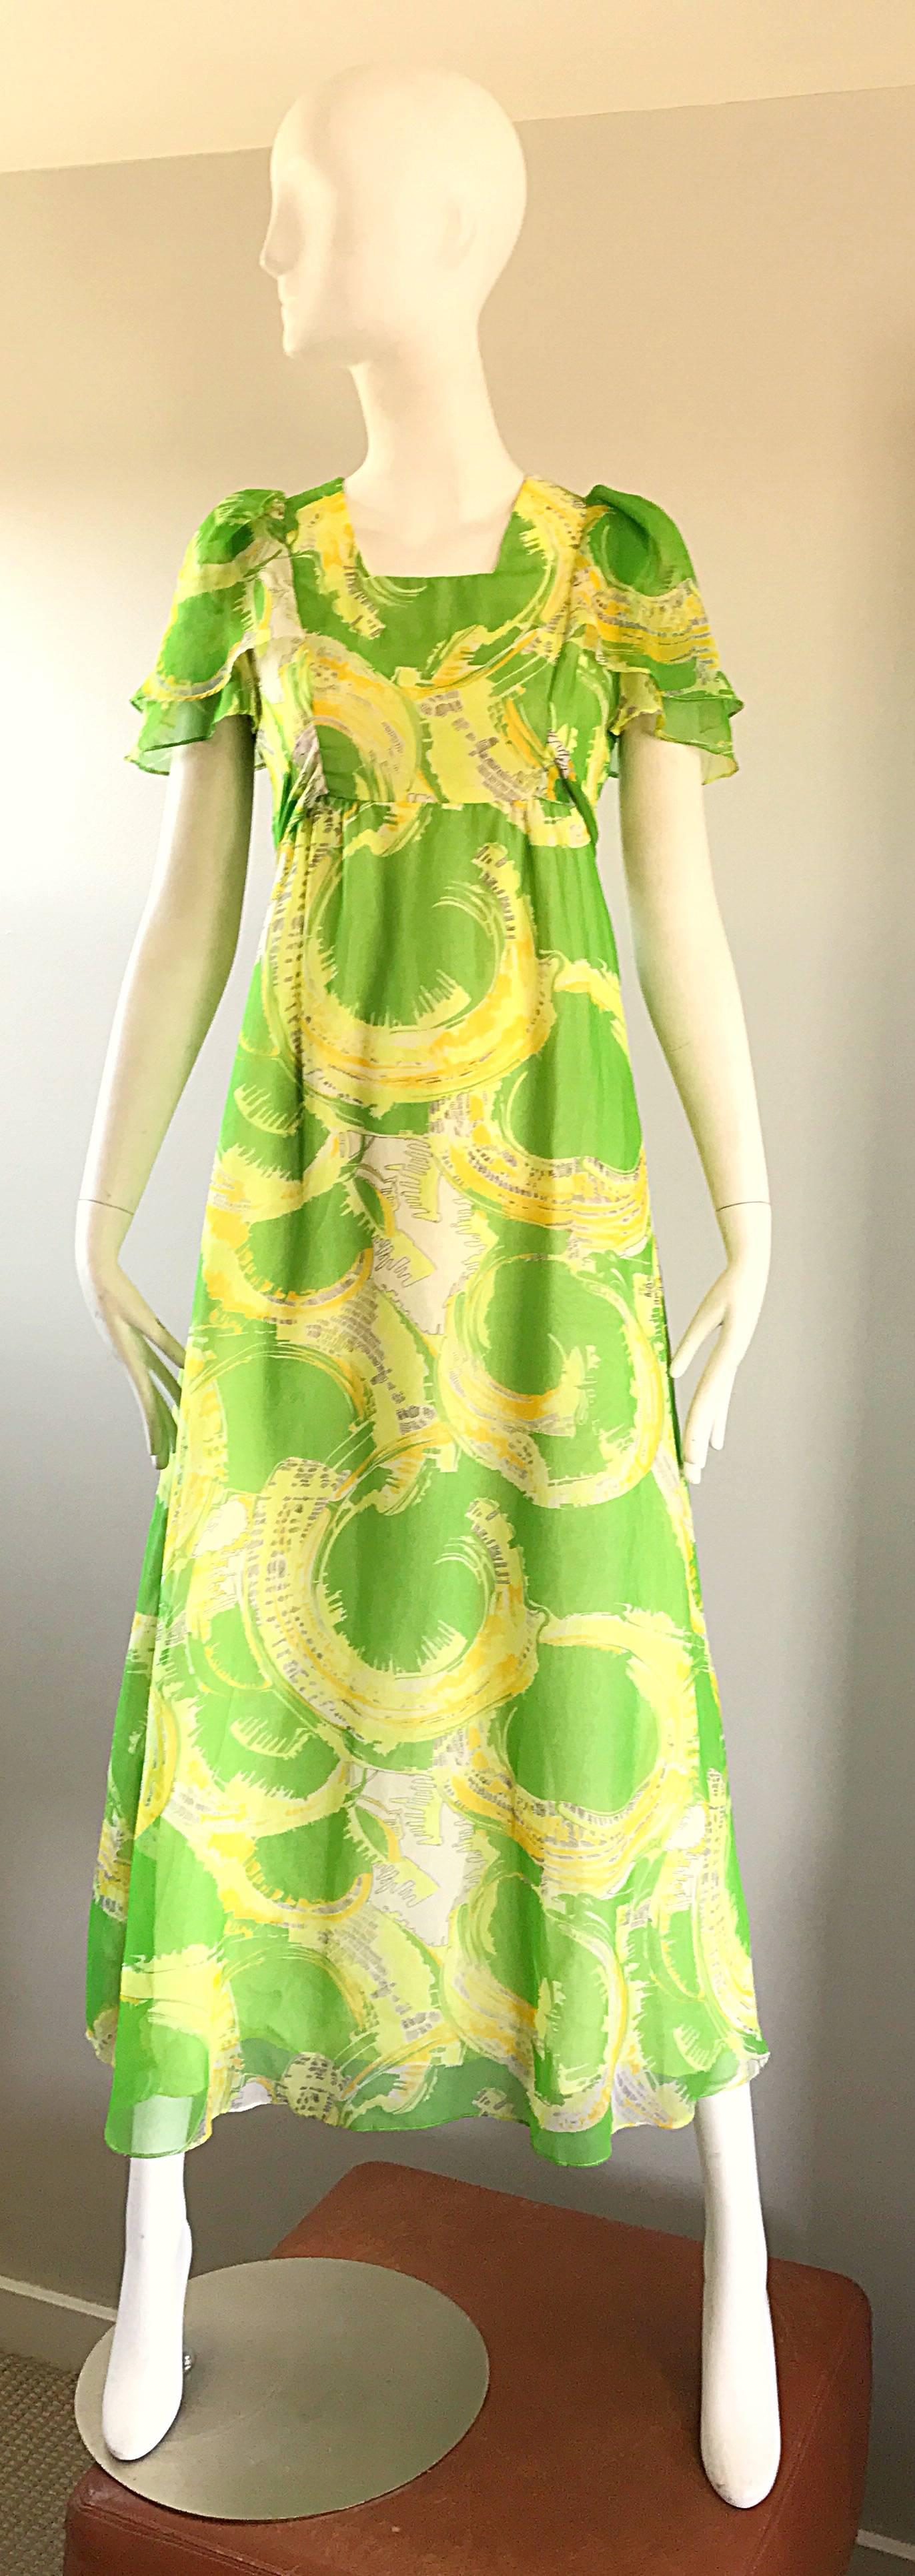 Superb 1970s neon lime green and yellow 'paint splatter' chiffon boho maxi dress! FItted bodice, with a wrap-around style belt and short flutter sleeves. 
Full forgiving maxi skirt. Hidden metal zipper up the back with hook-and-eye closure. Perfect